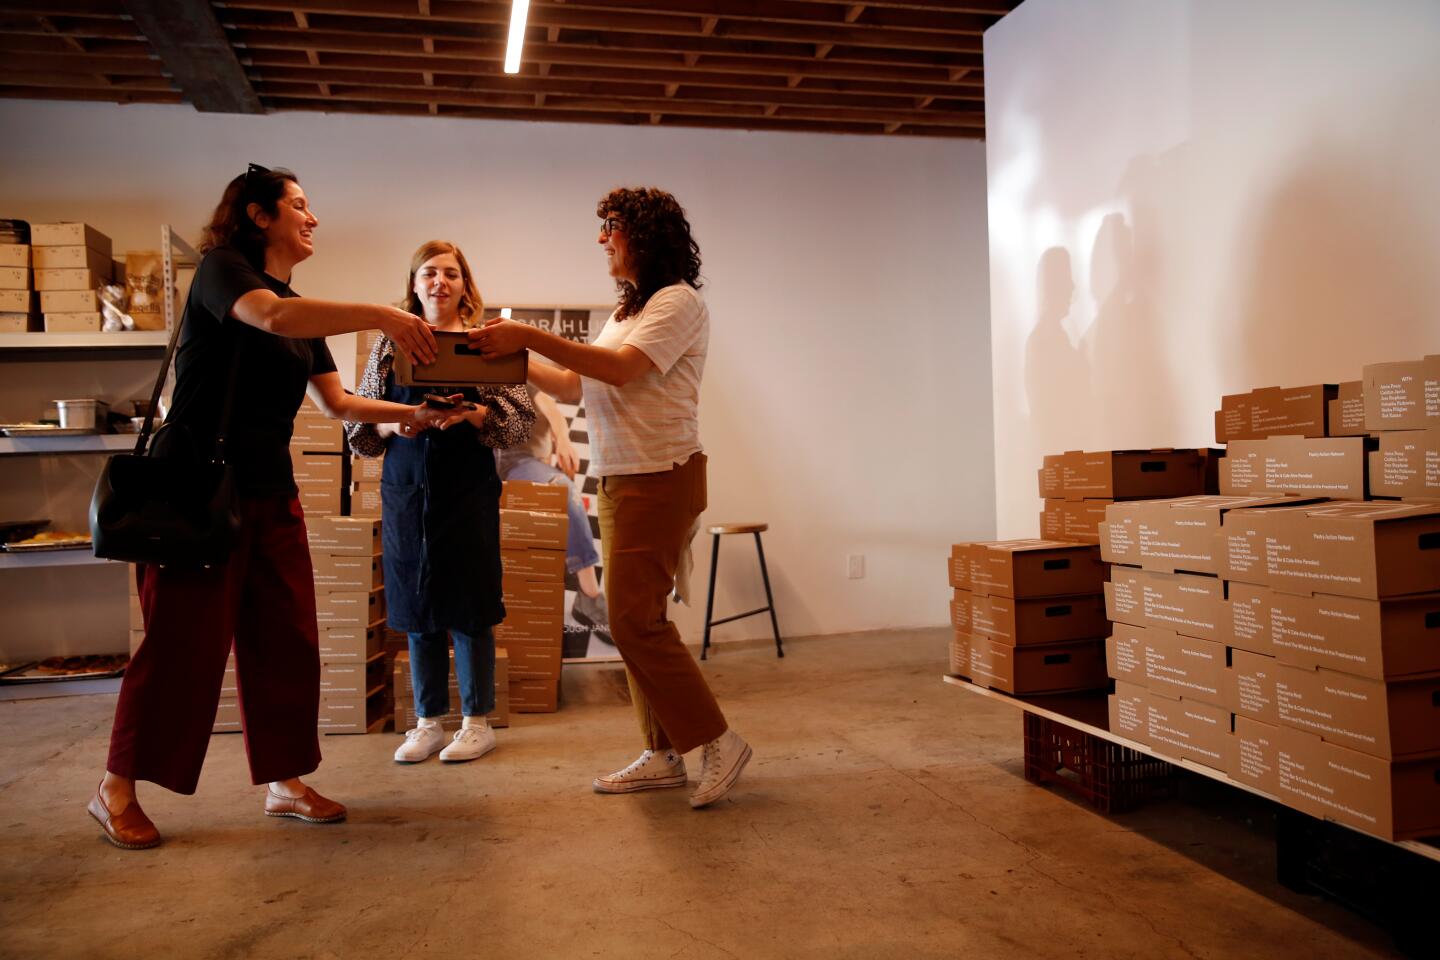 Lillian Anjarjolian, left, receives a box of baked goods from chef Sasha Piligian as chef Anna Posey looks on at the Pastry Action Network's fundraiser.